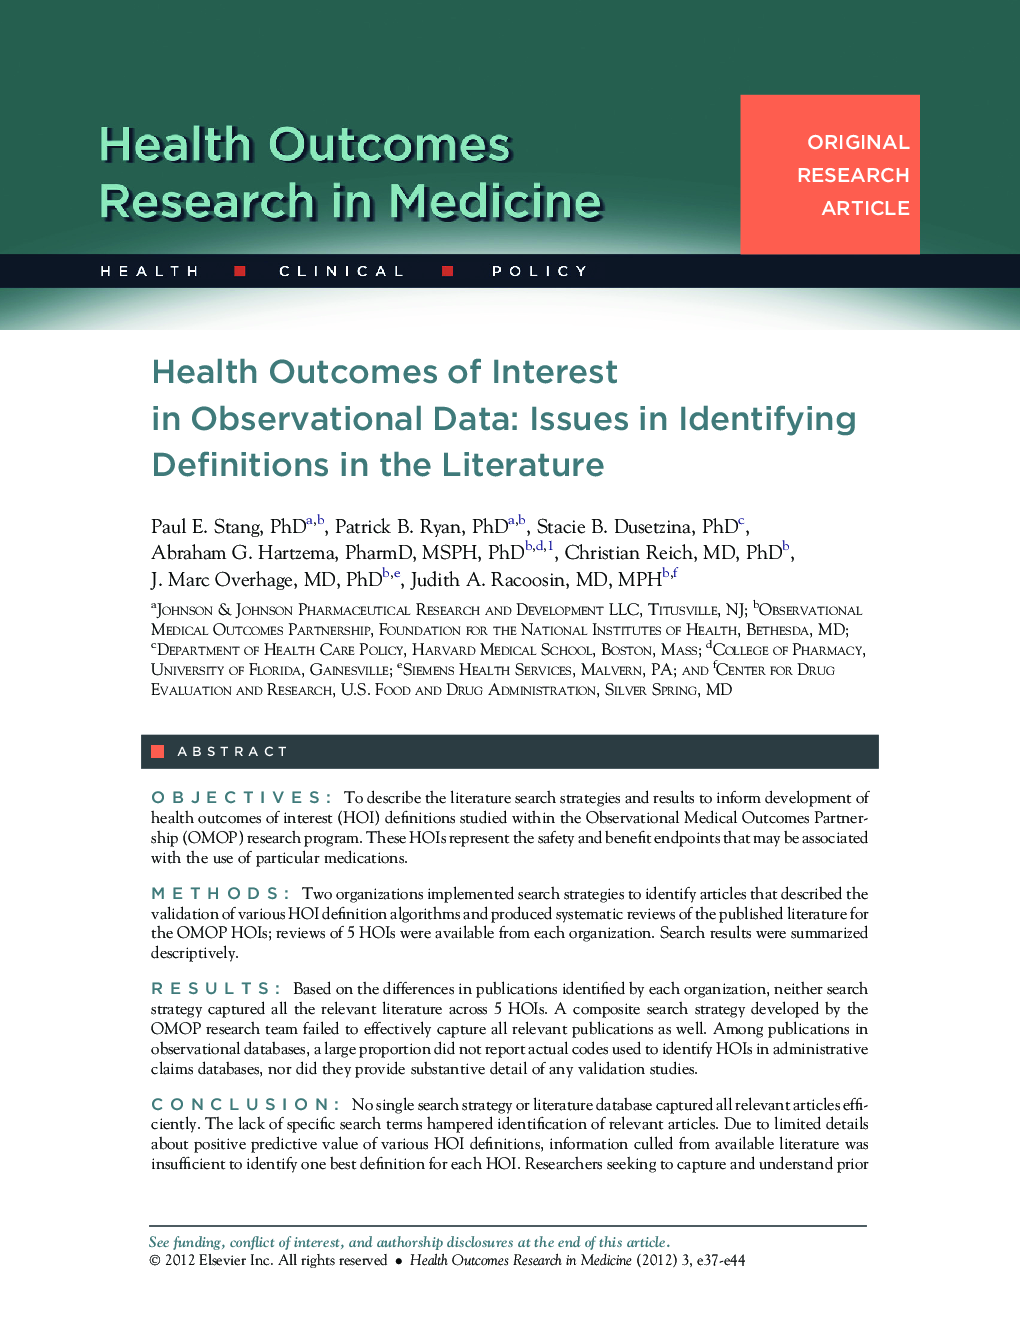 Health Outcomes of Interest in Observational Data: Issues in Identifying Definitions in the Literature 